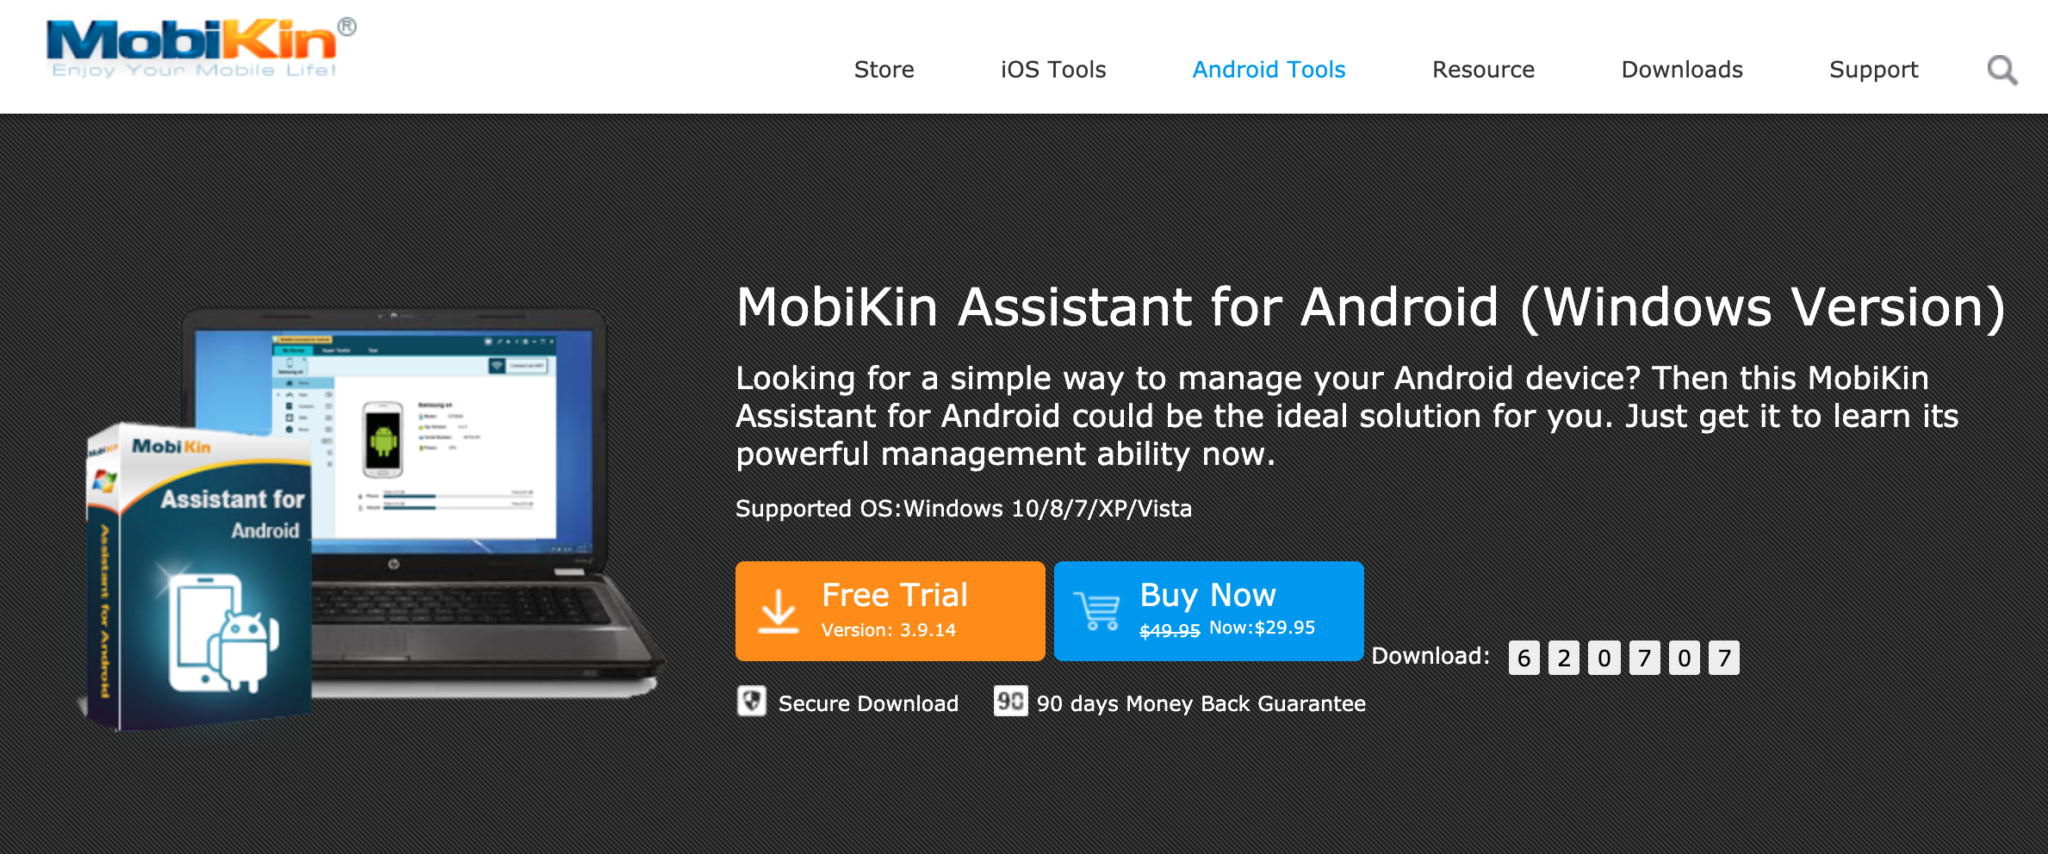 mobikin assistant for android review 2016